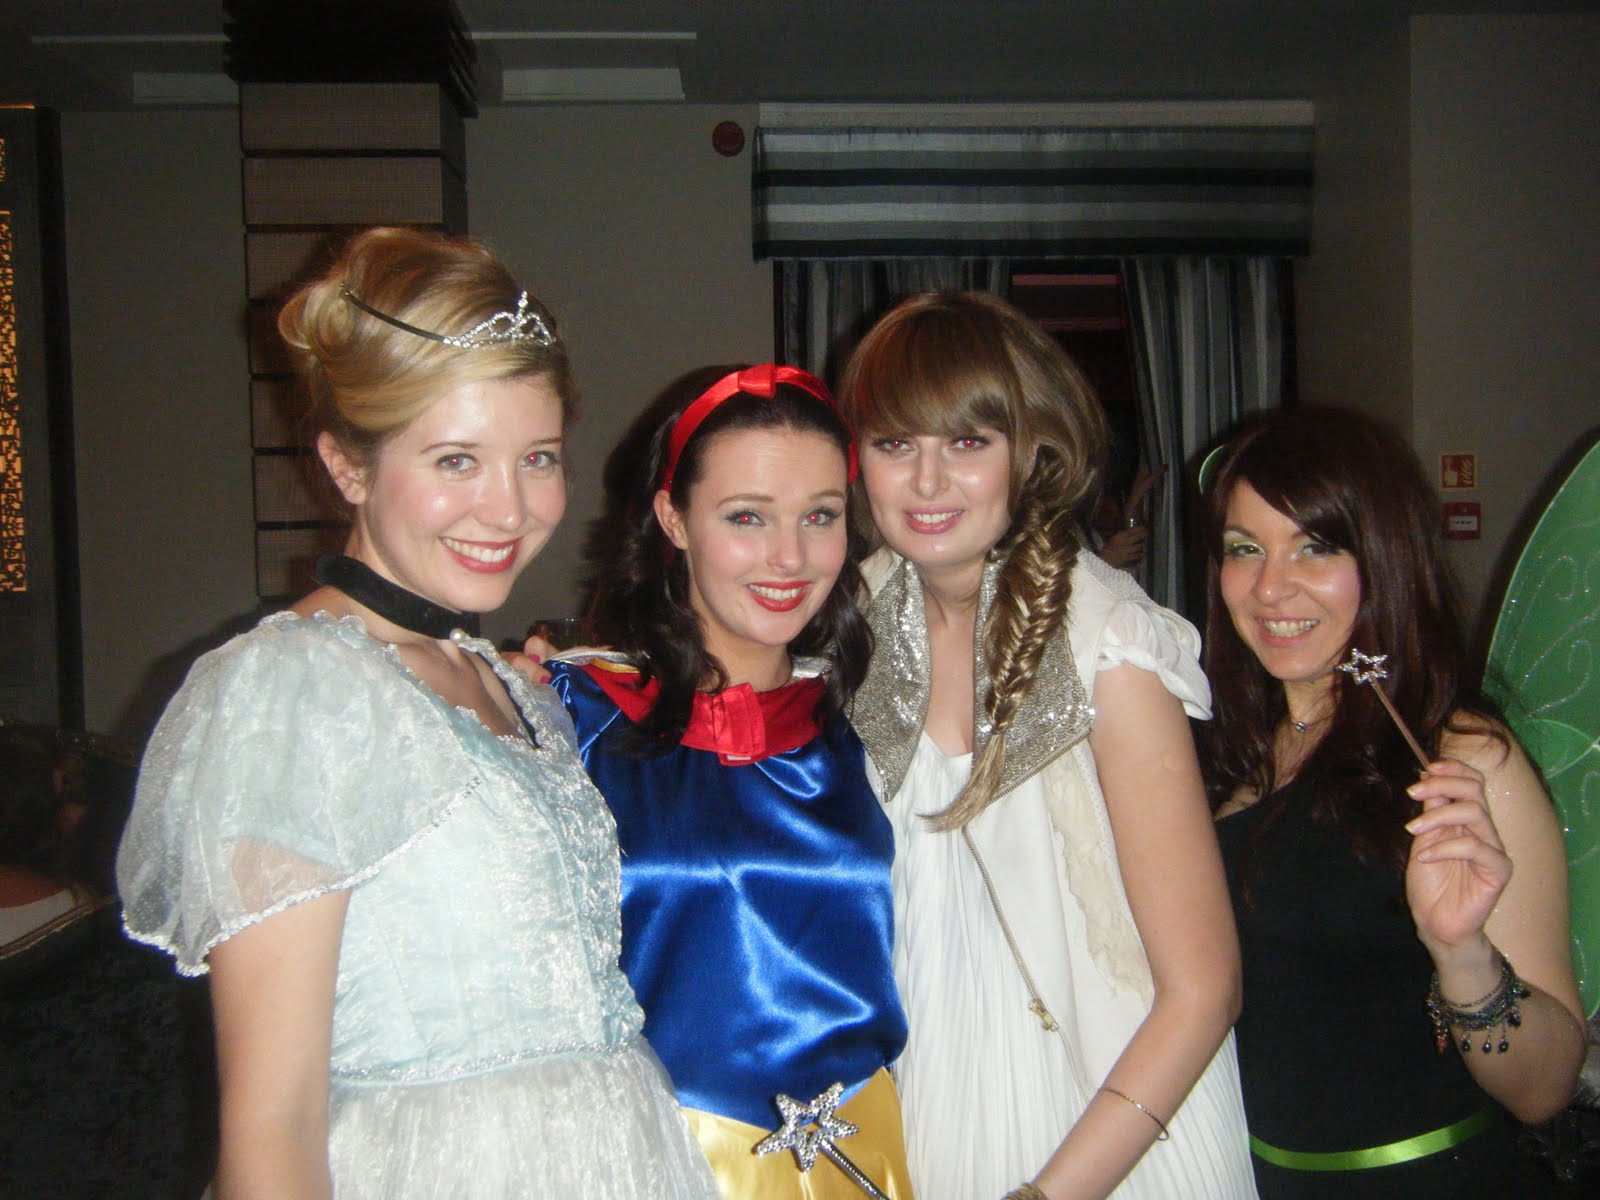 With Cinderella and Snow White